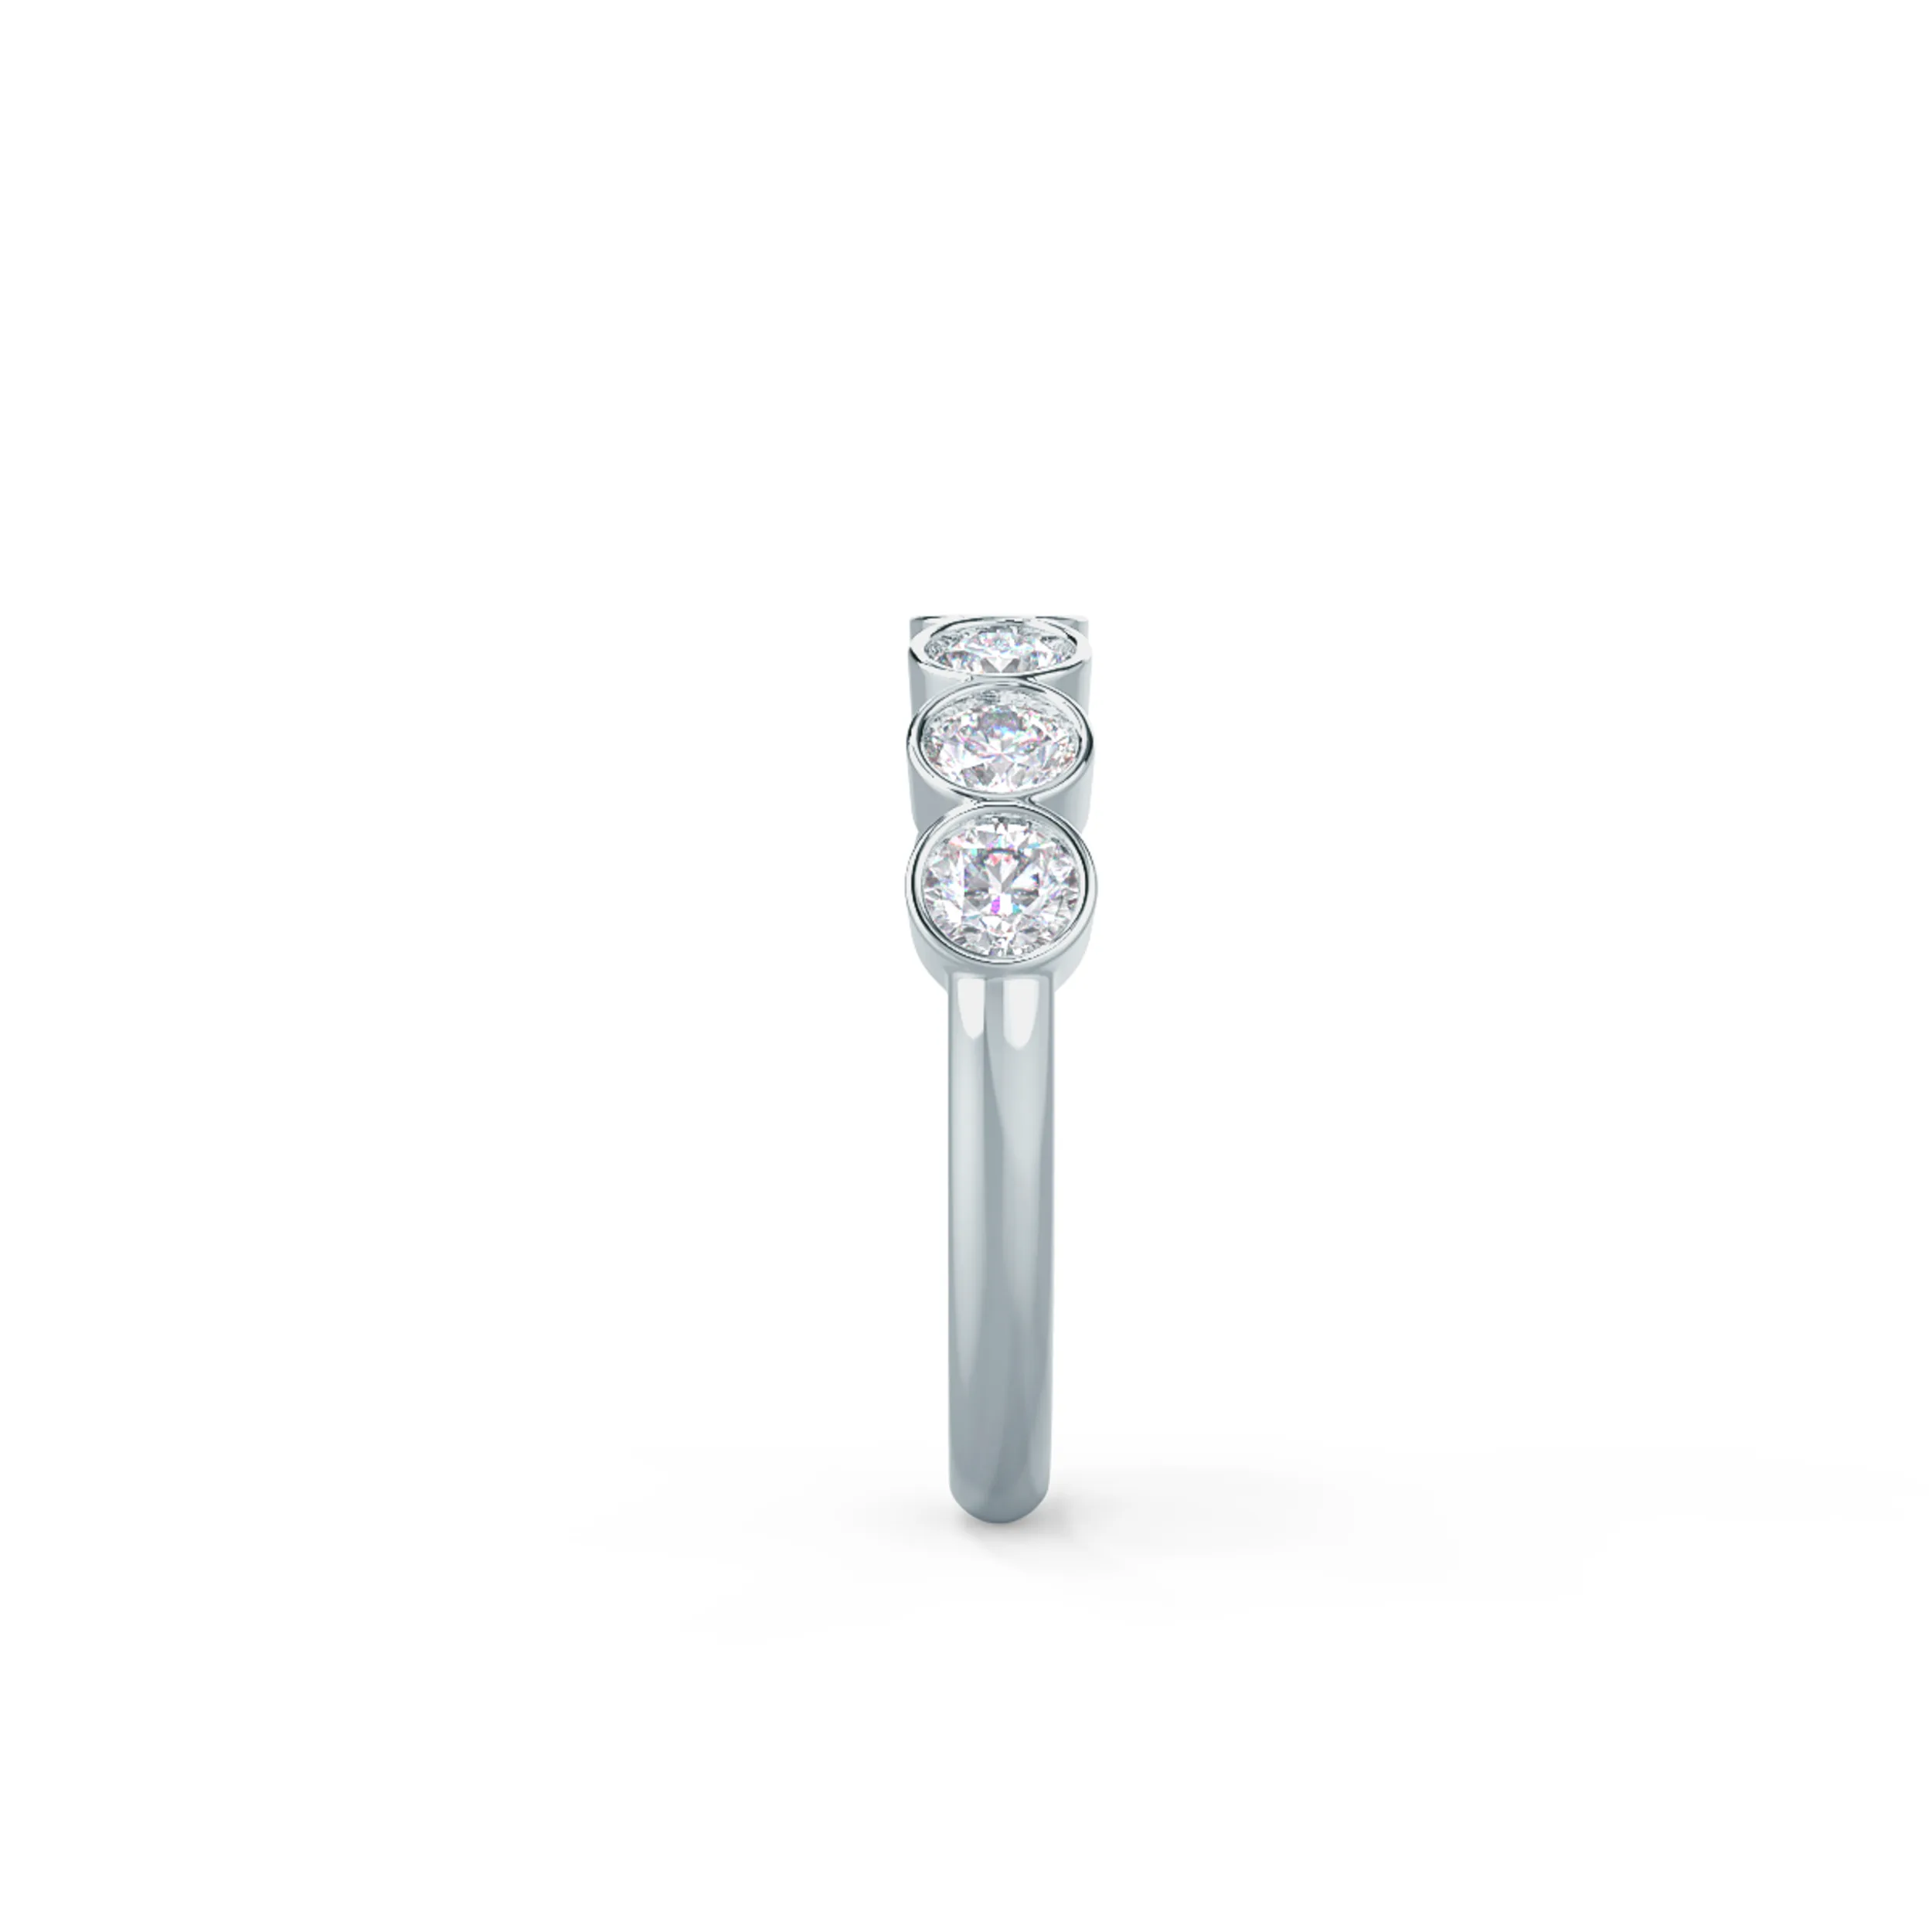 Exceptional Quality 1.0 ctw Round Lab Diamonds Bezel Seven Stone in 18k White Gold (Side View)